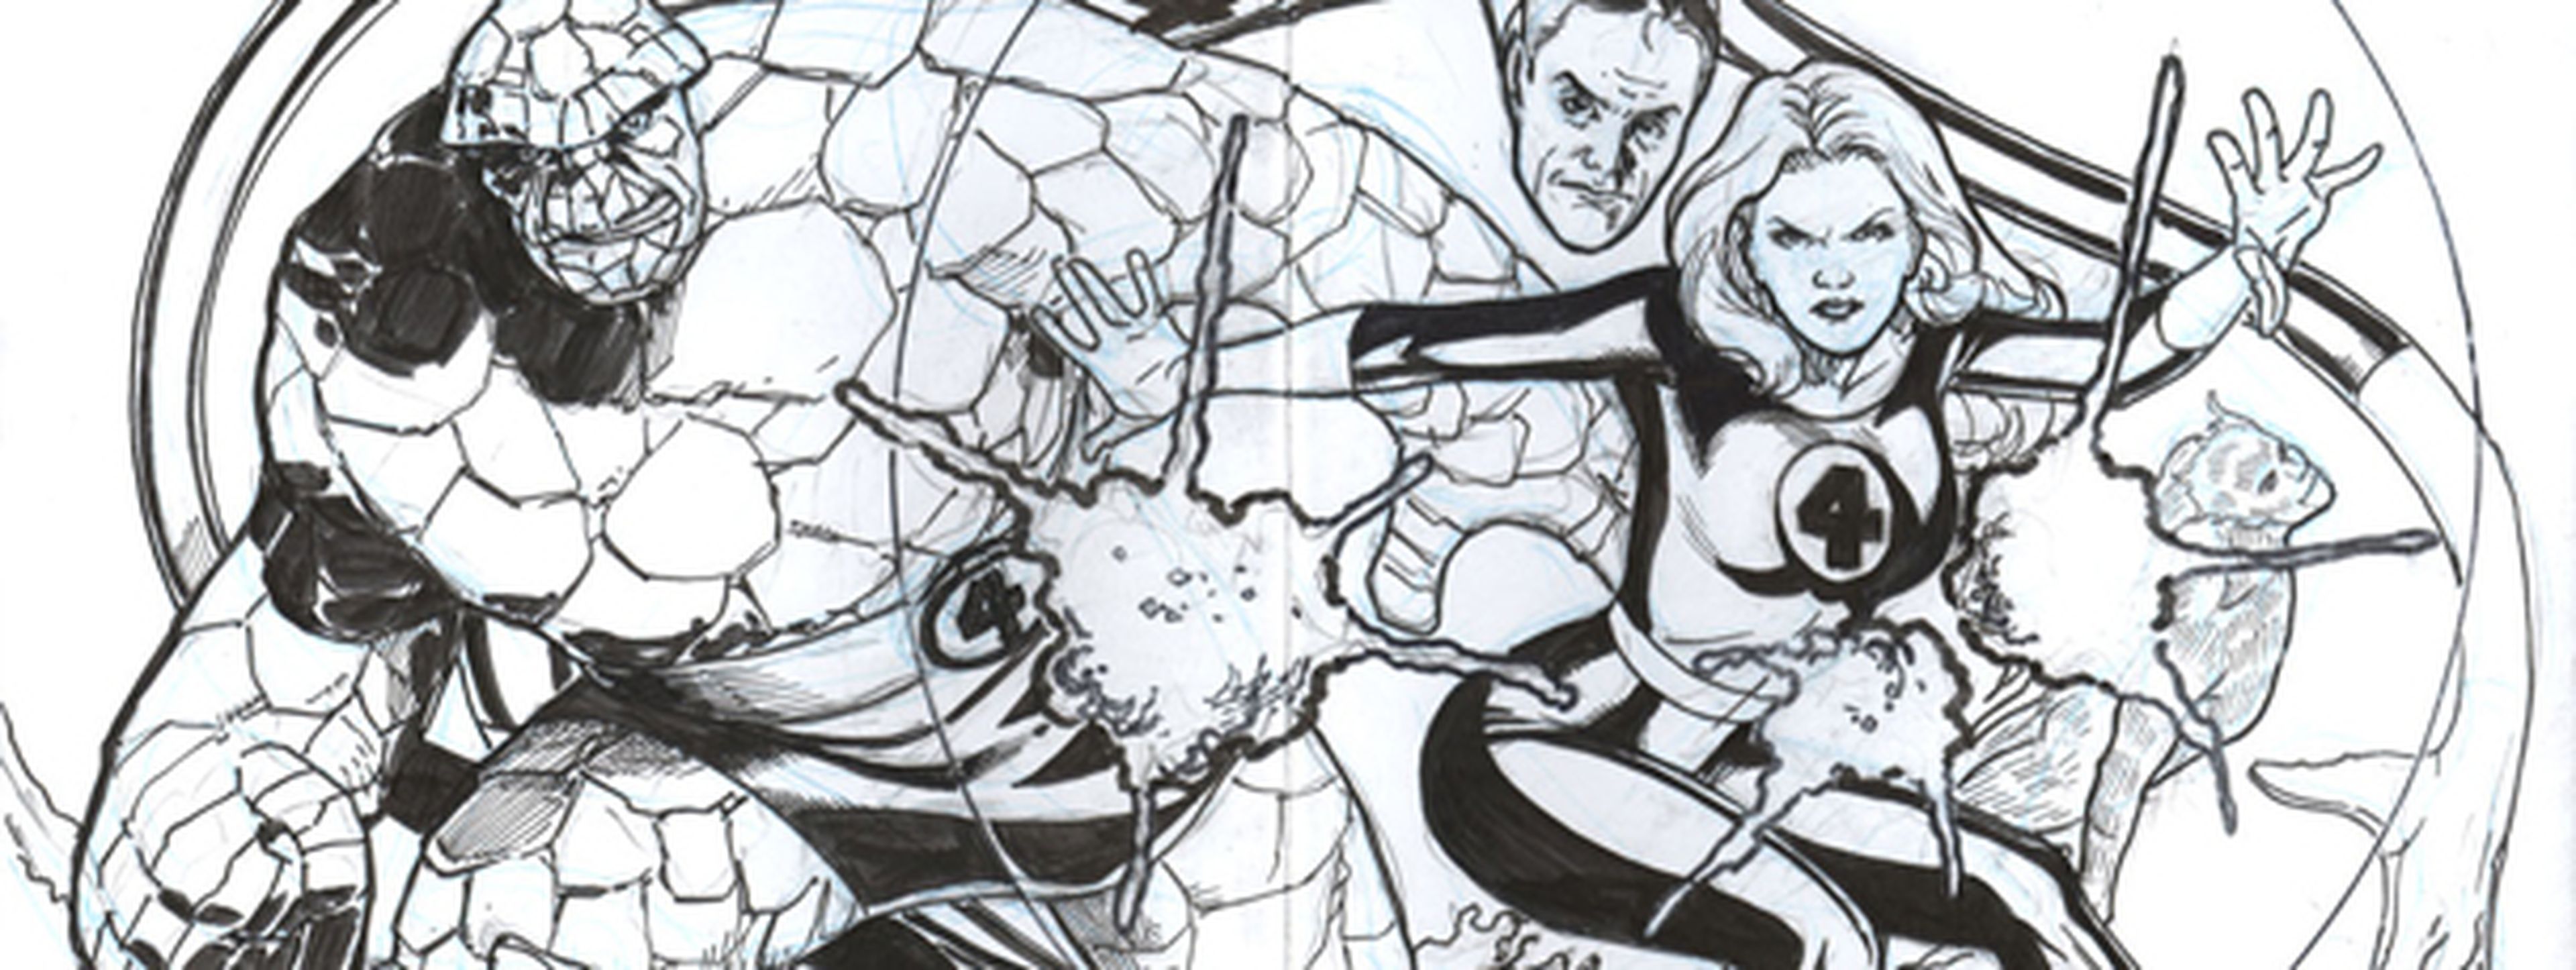 The Hero Initiative: The Fantastic Four 100 Project